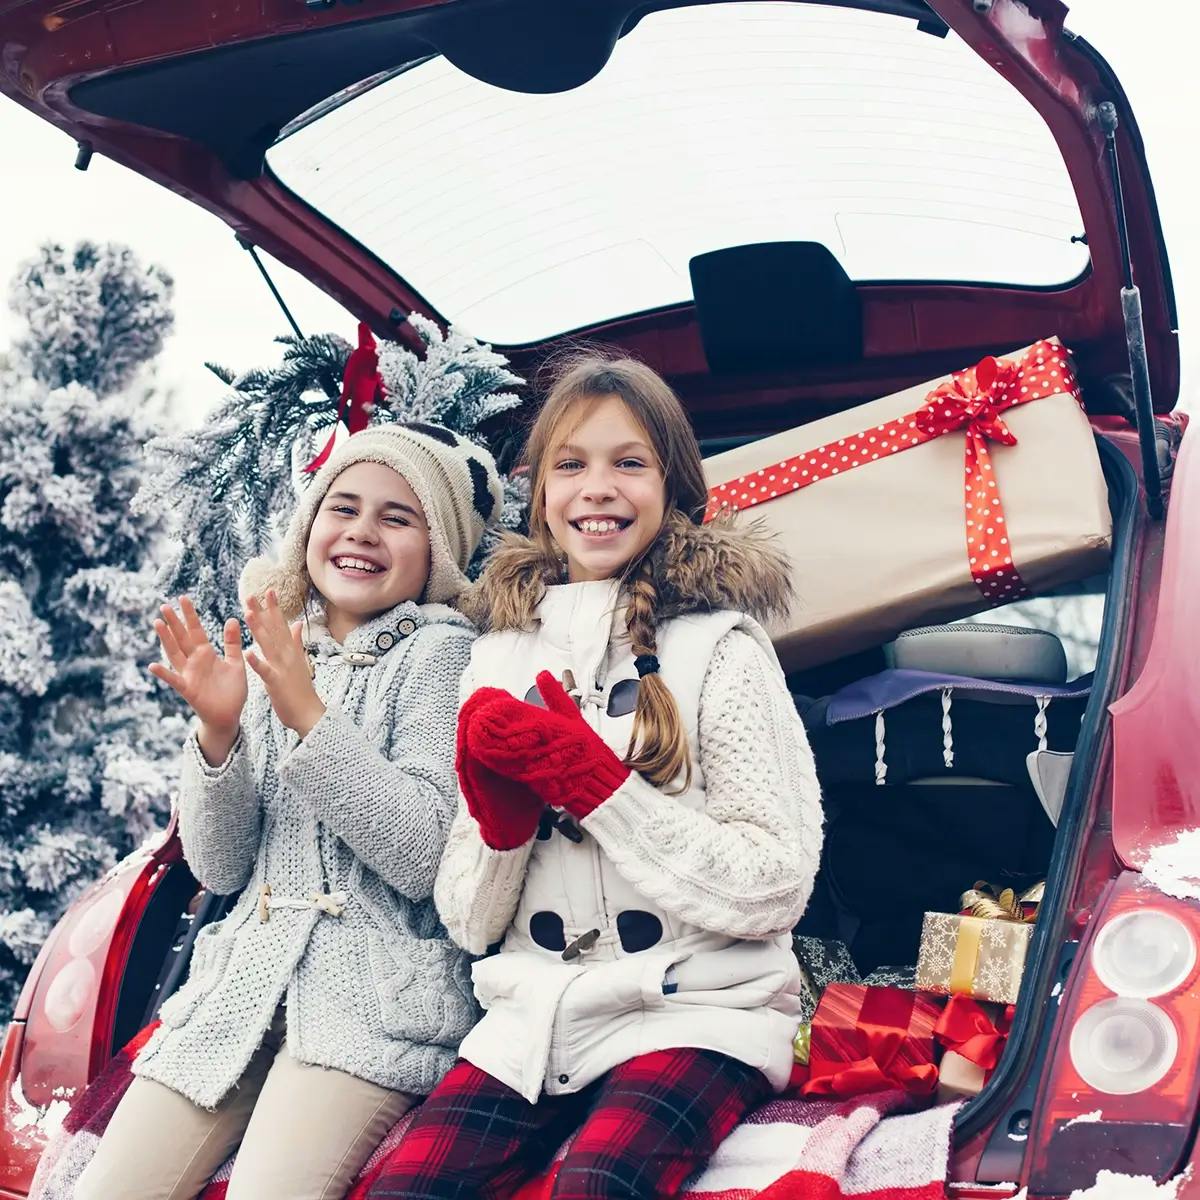 Two girls sitting in the back of a car filled with Christmas gifts